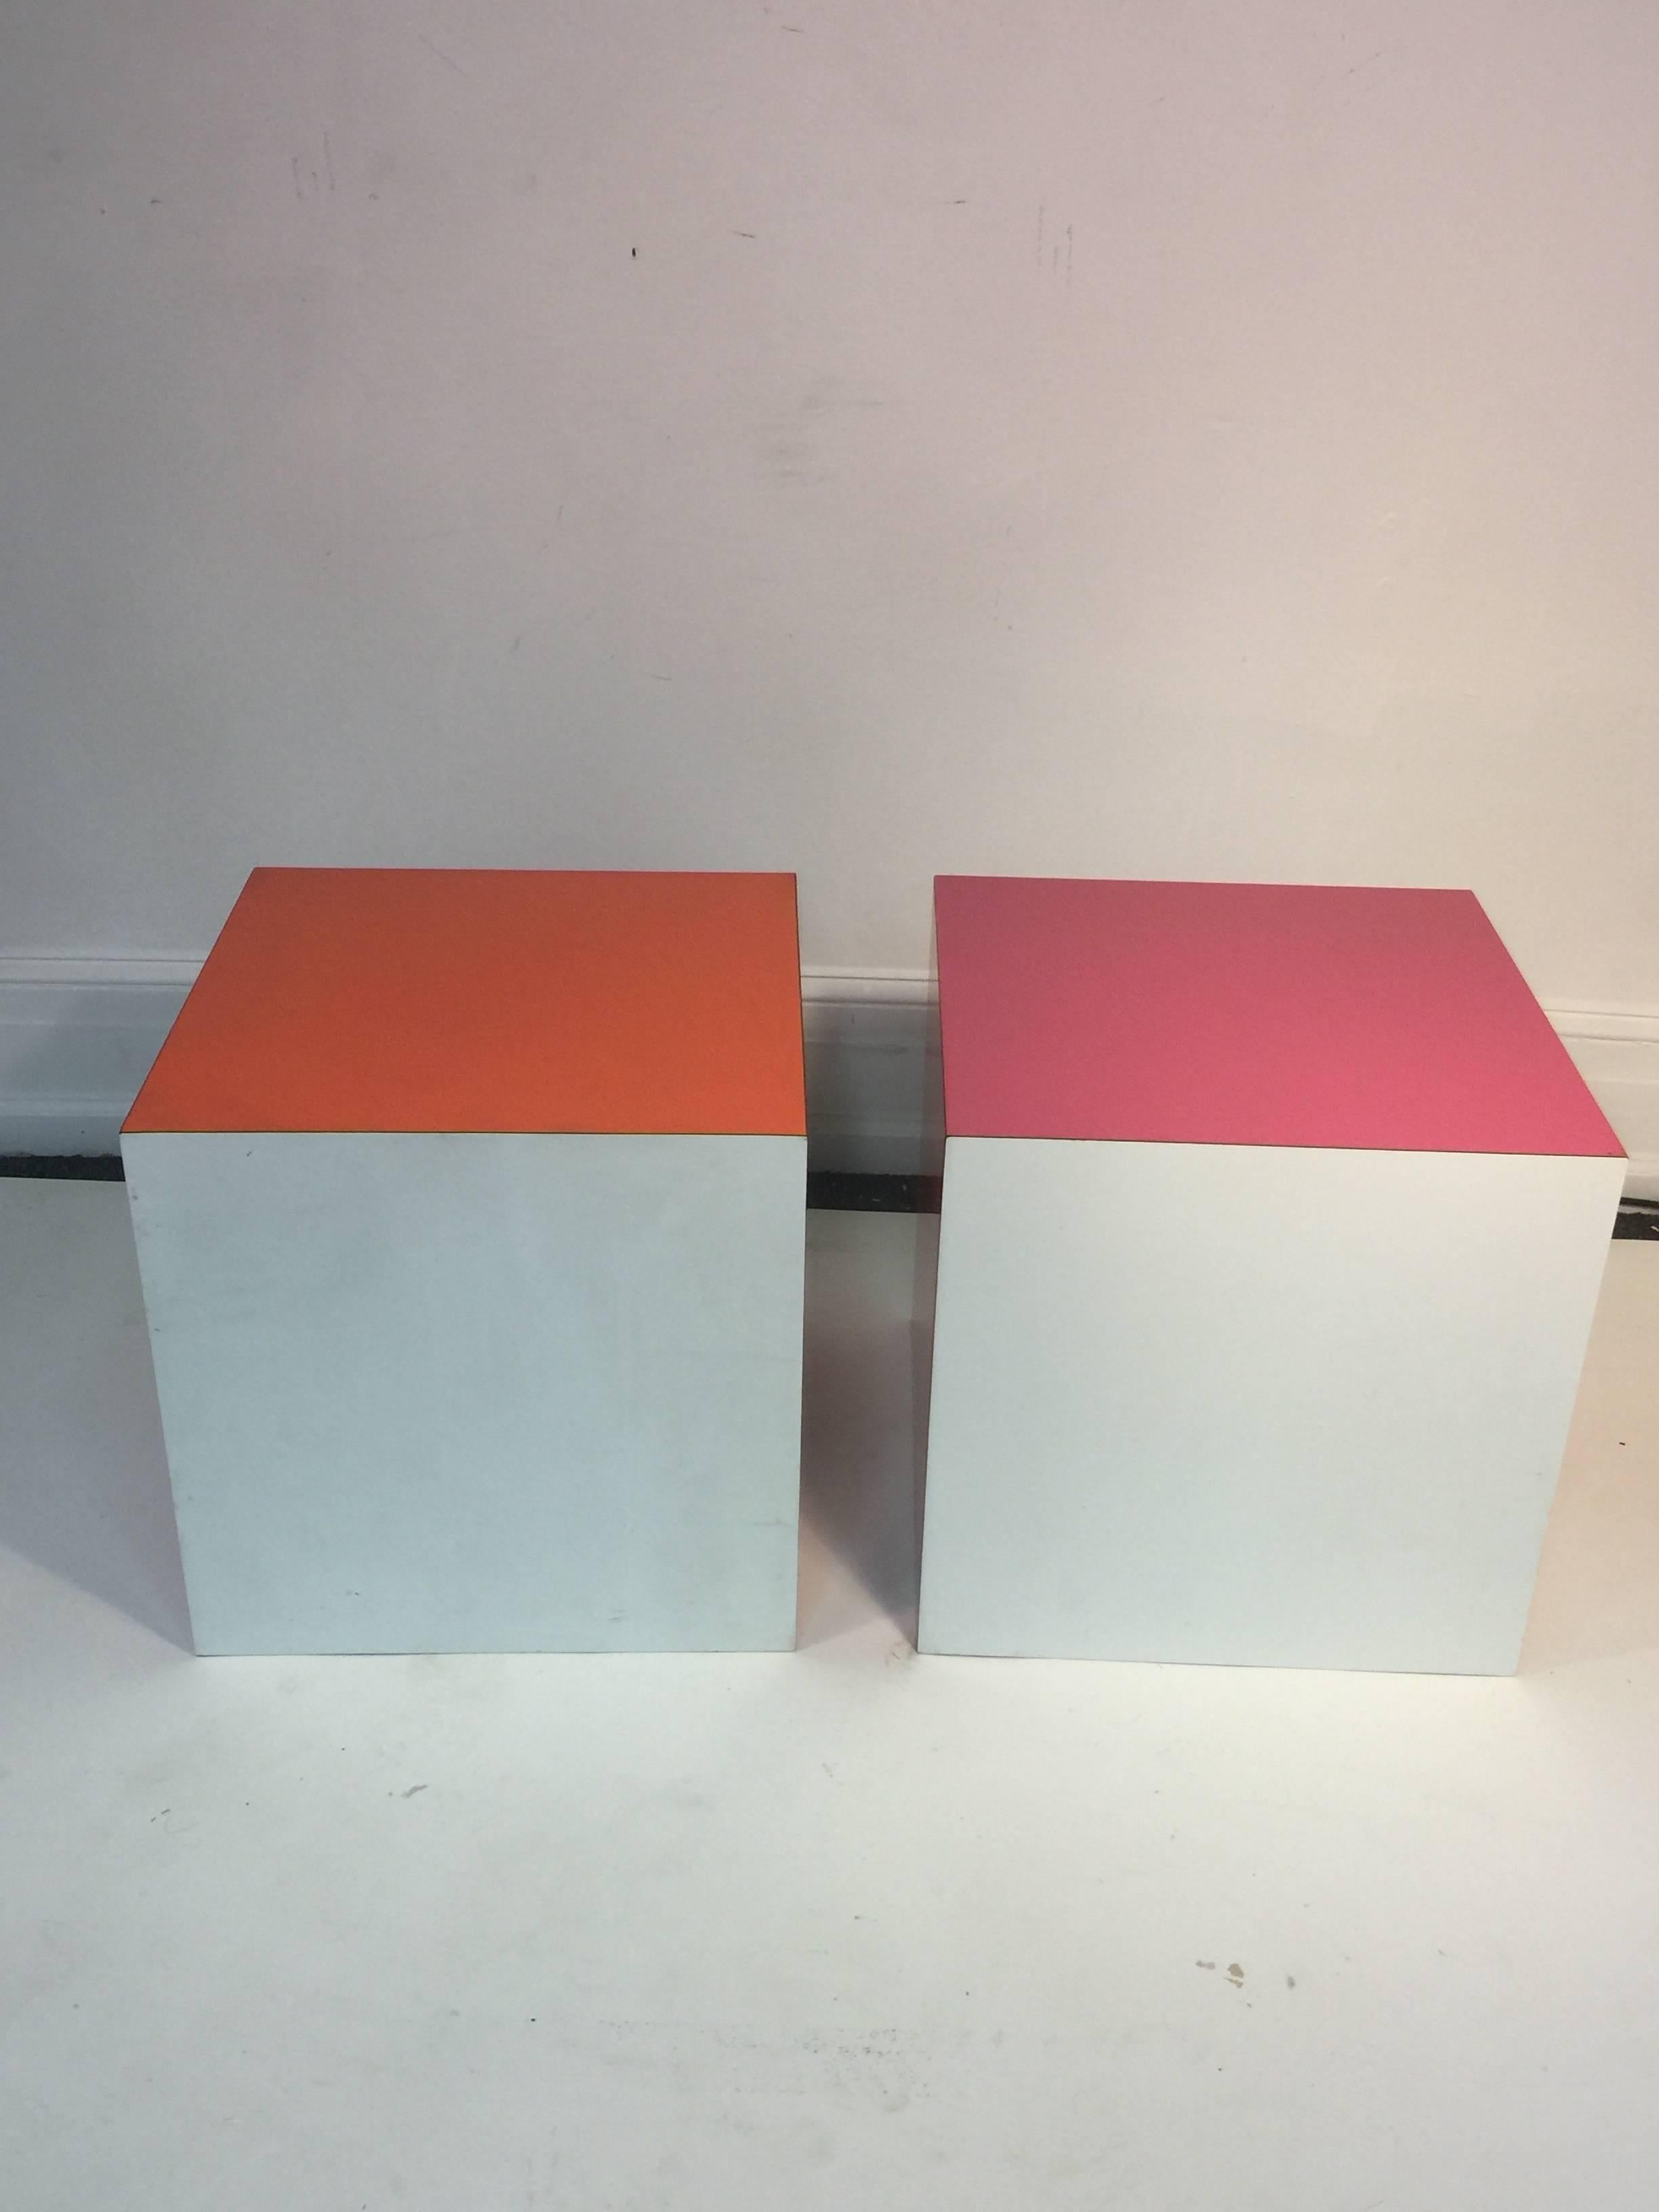 Mod Verner Panton Style Cube Side Tables/Stools In Excellent Condition For Sale In Allentown, PA